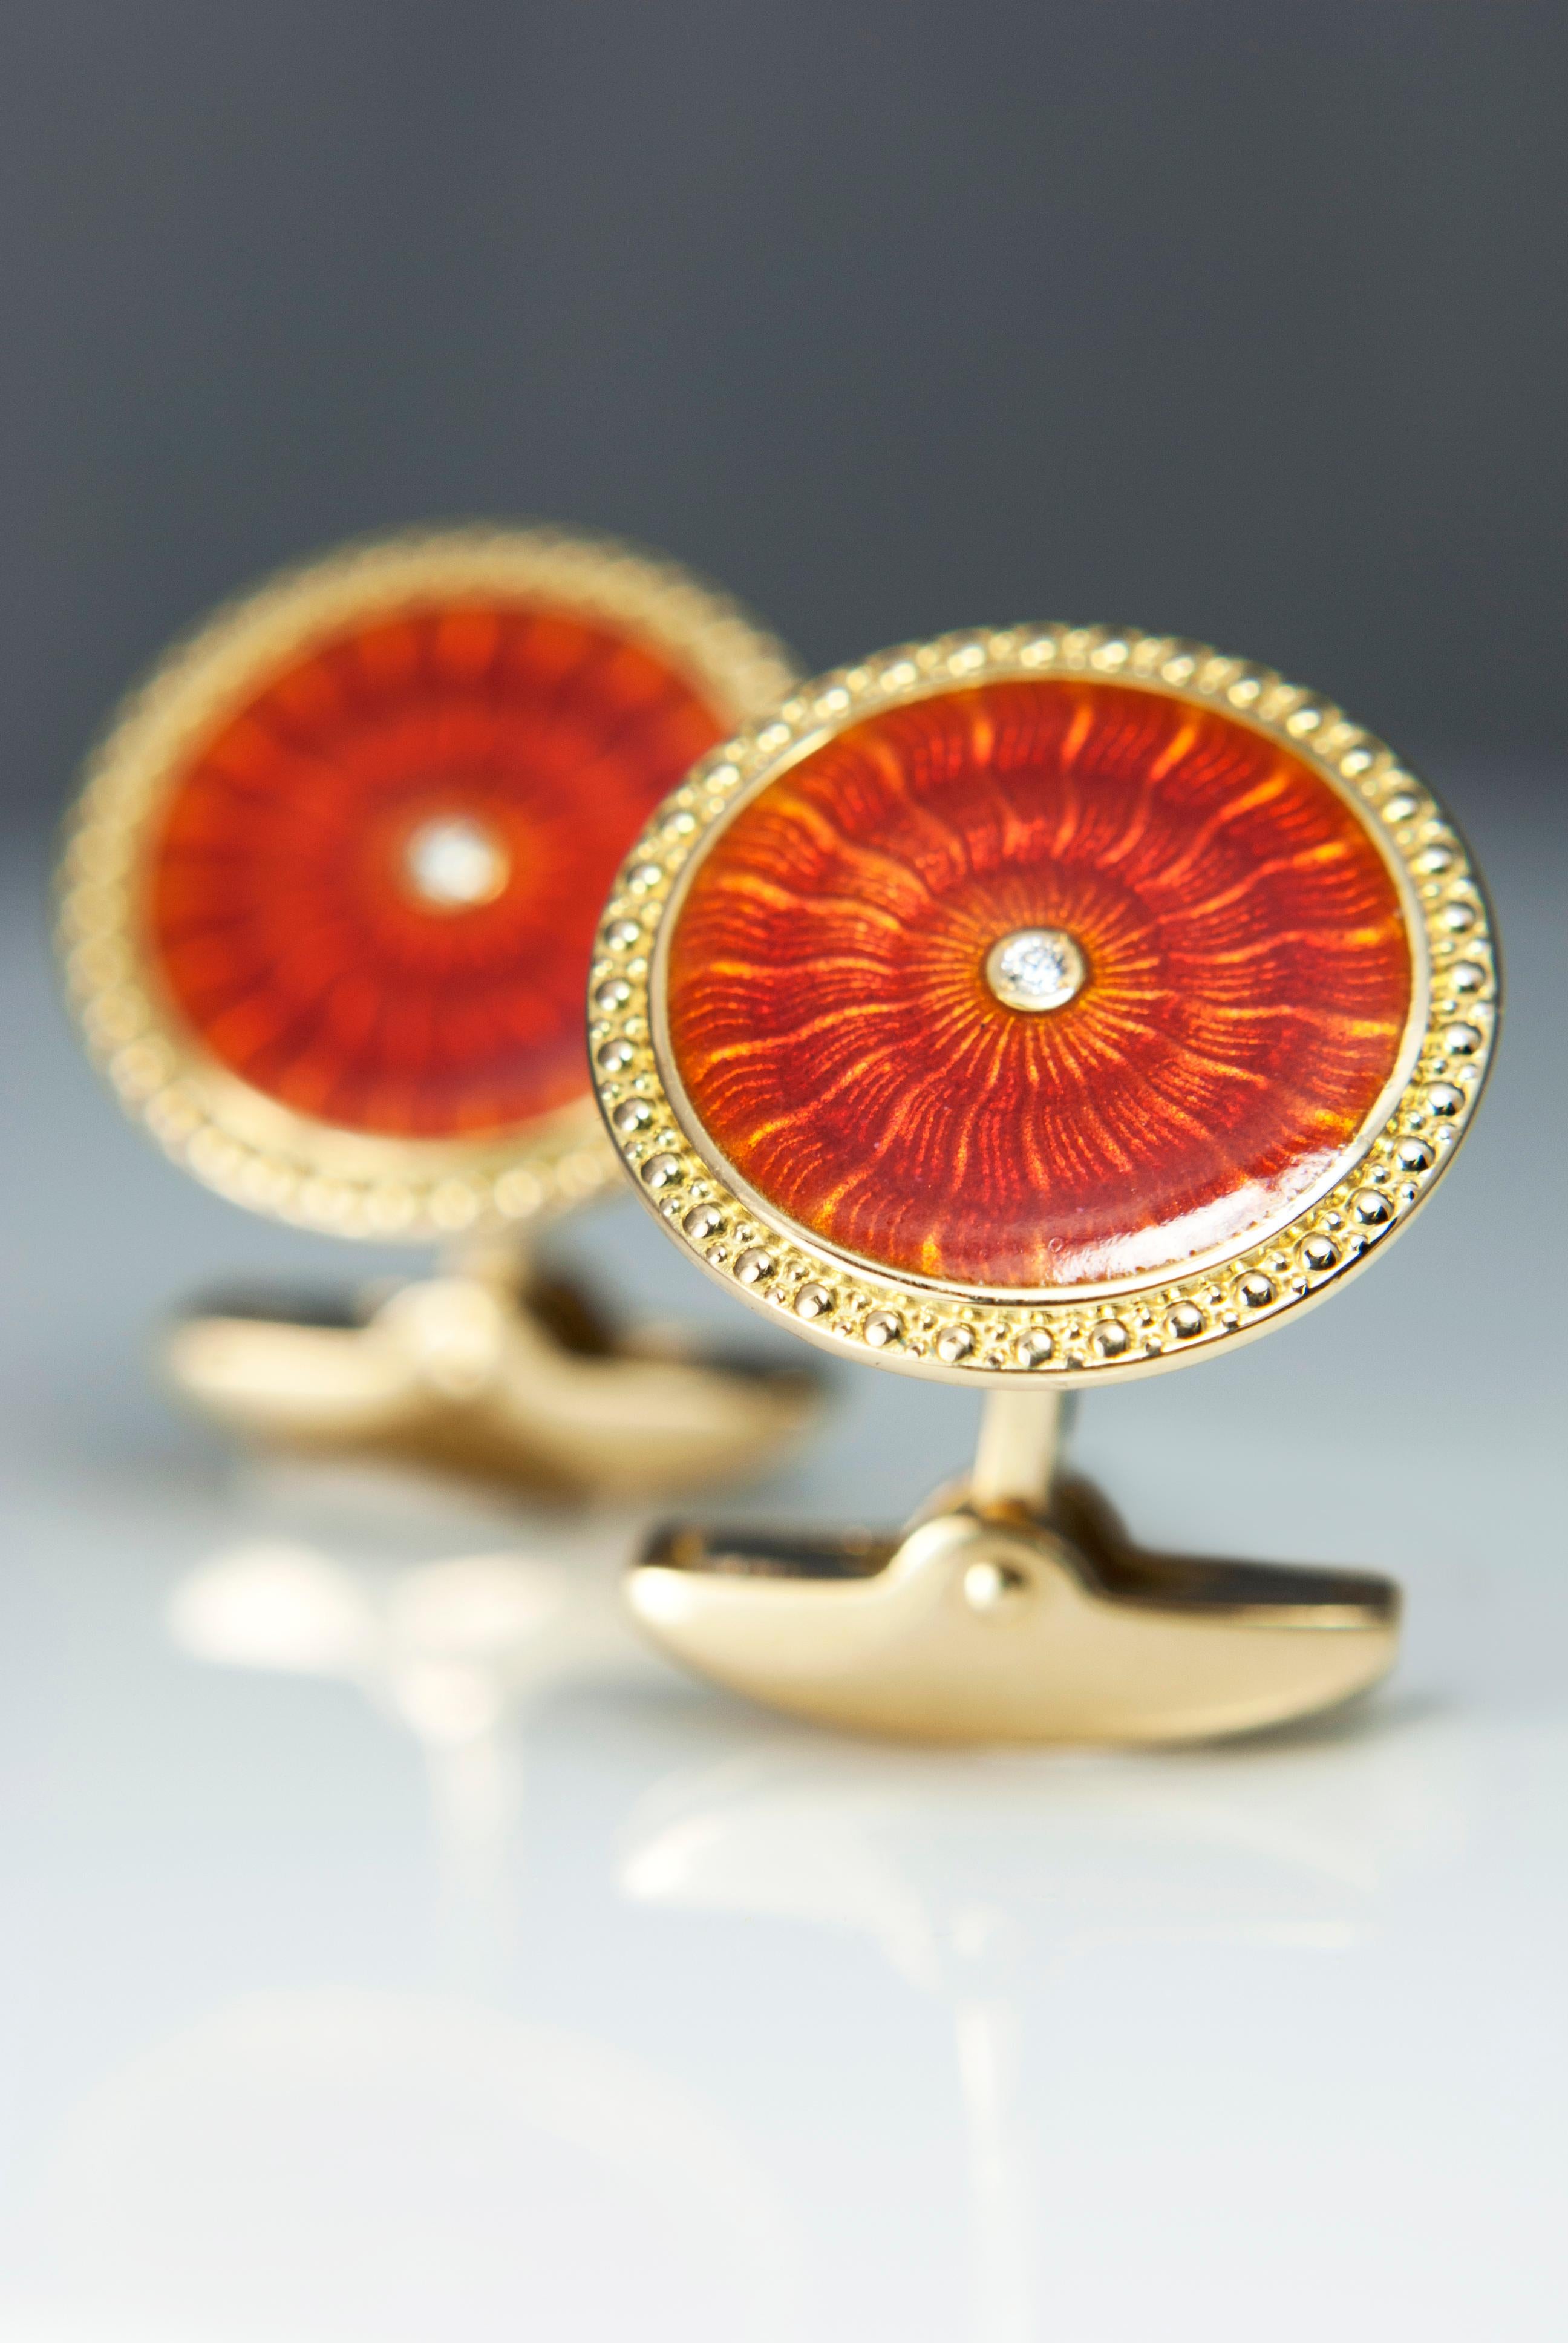 DEAKIN & FRANCIS, Piccadilly Arcade, London

As featured in The Country Life Magazine, these beautiful pair of cufflinks are a must have in any gentleman's wardrobe. And this pair of 18ct Gold cufflinks are a must.

With a striking, hand-enamelled